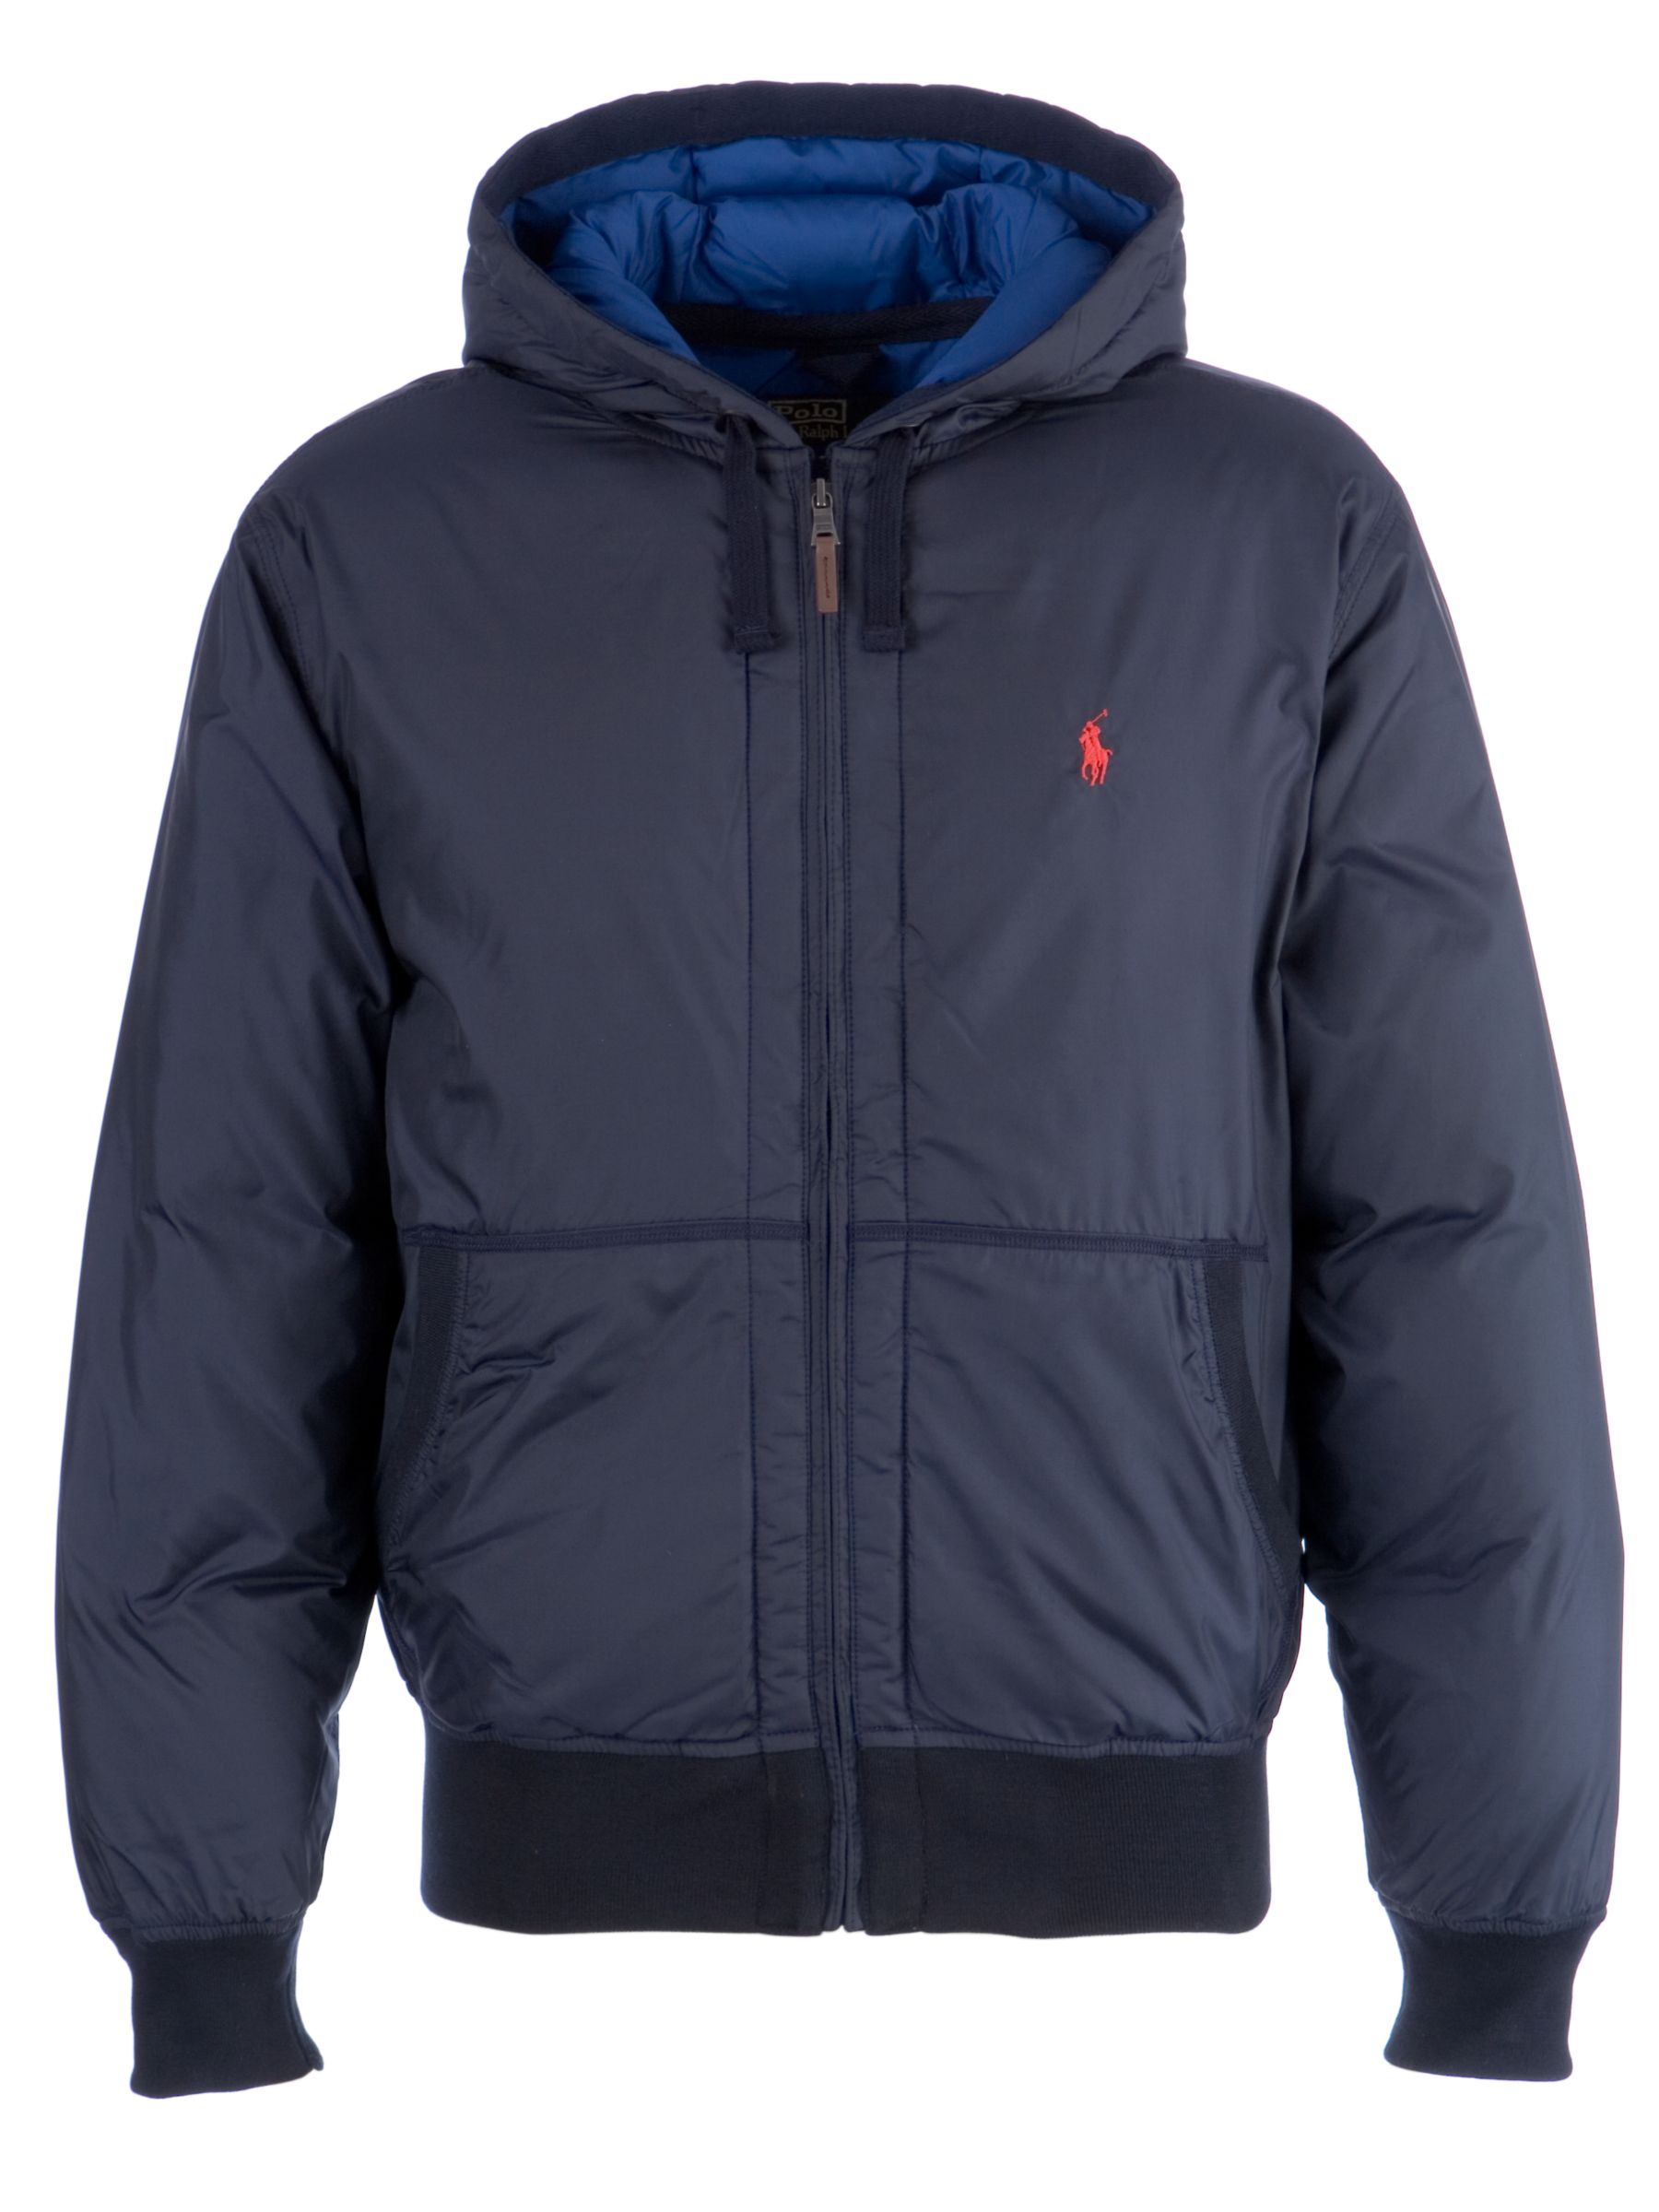 Polo Ralph Lauren Hooded Track Jacket, Navy at John Lewis